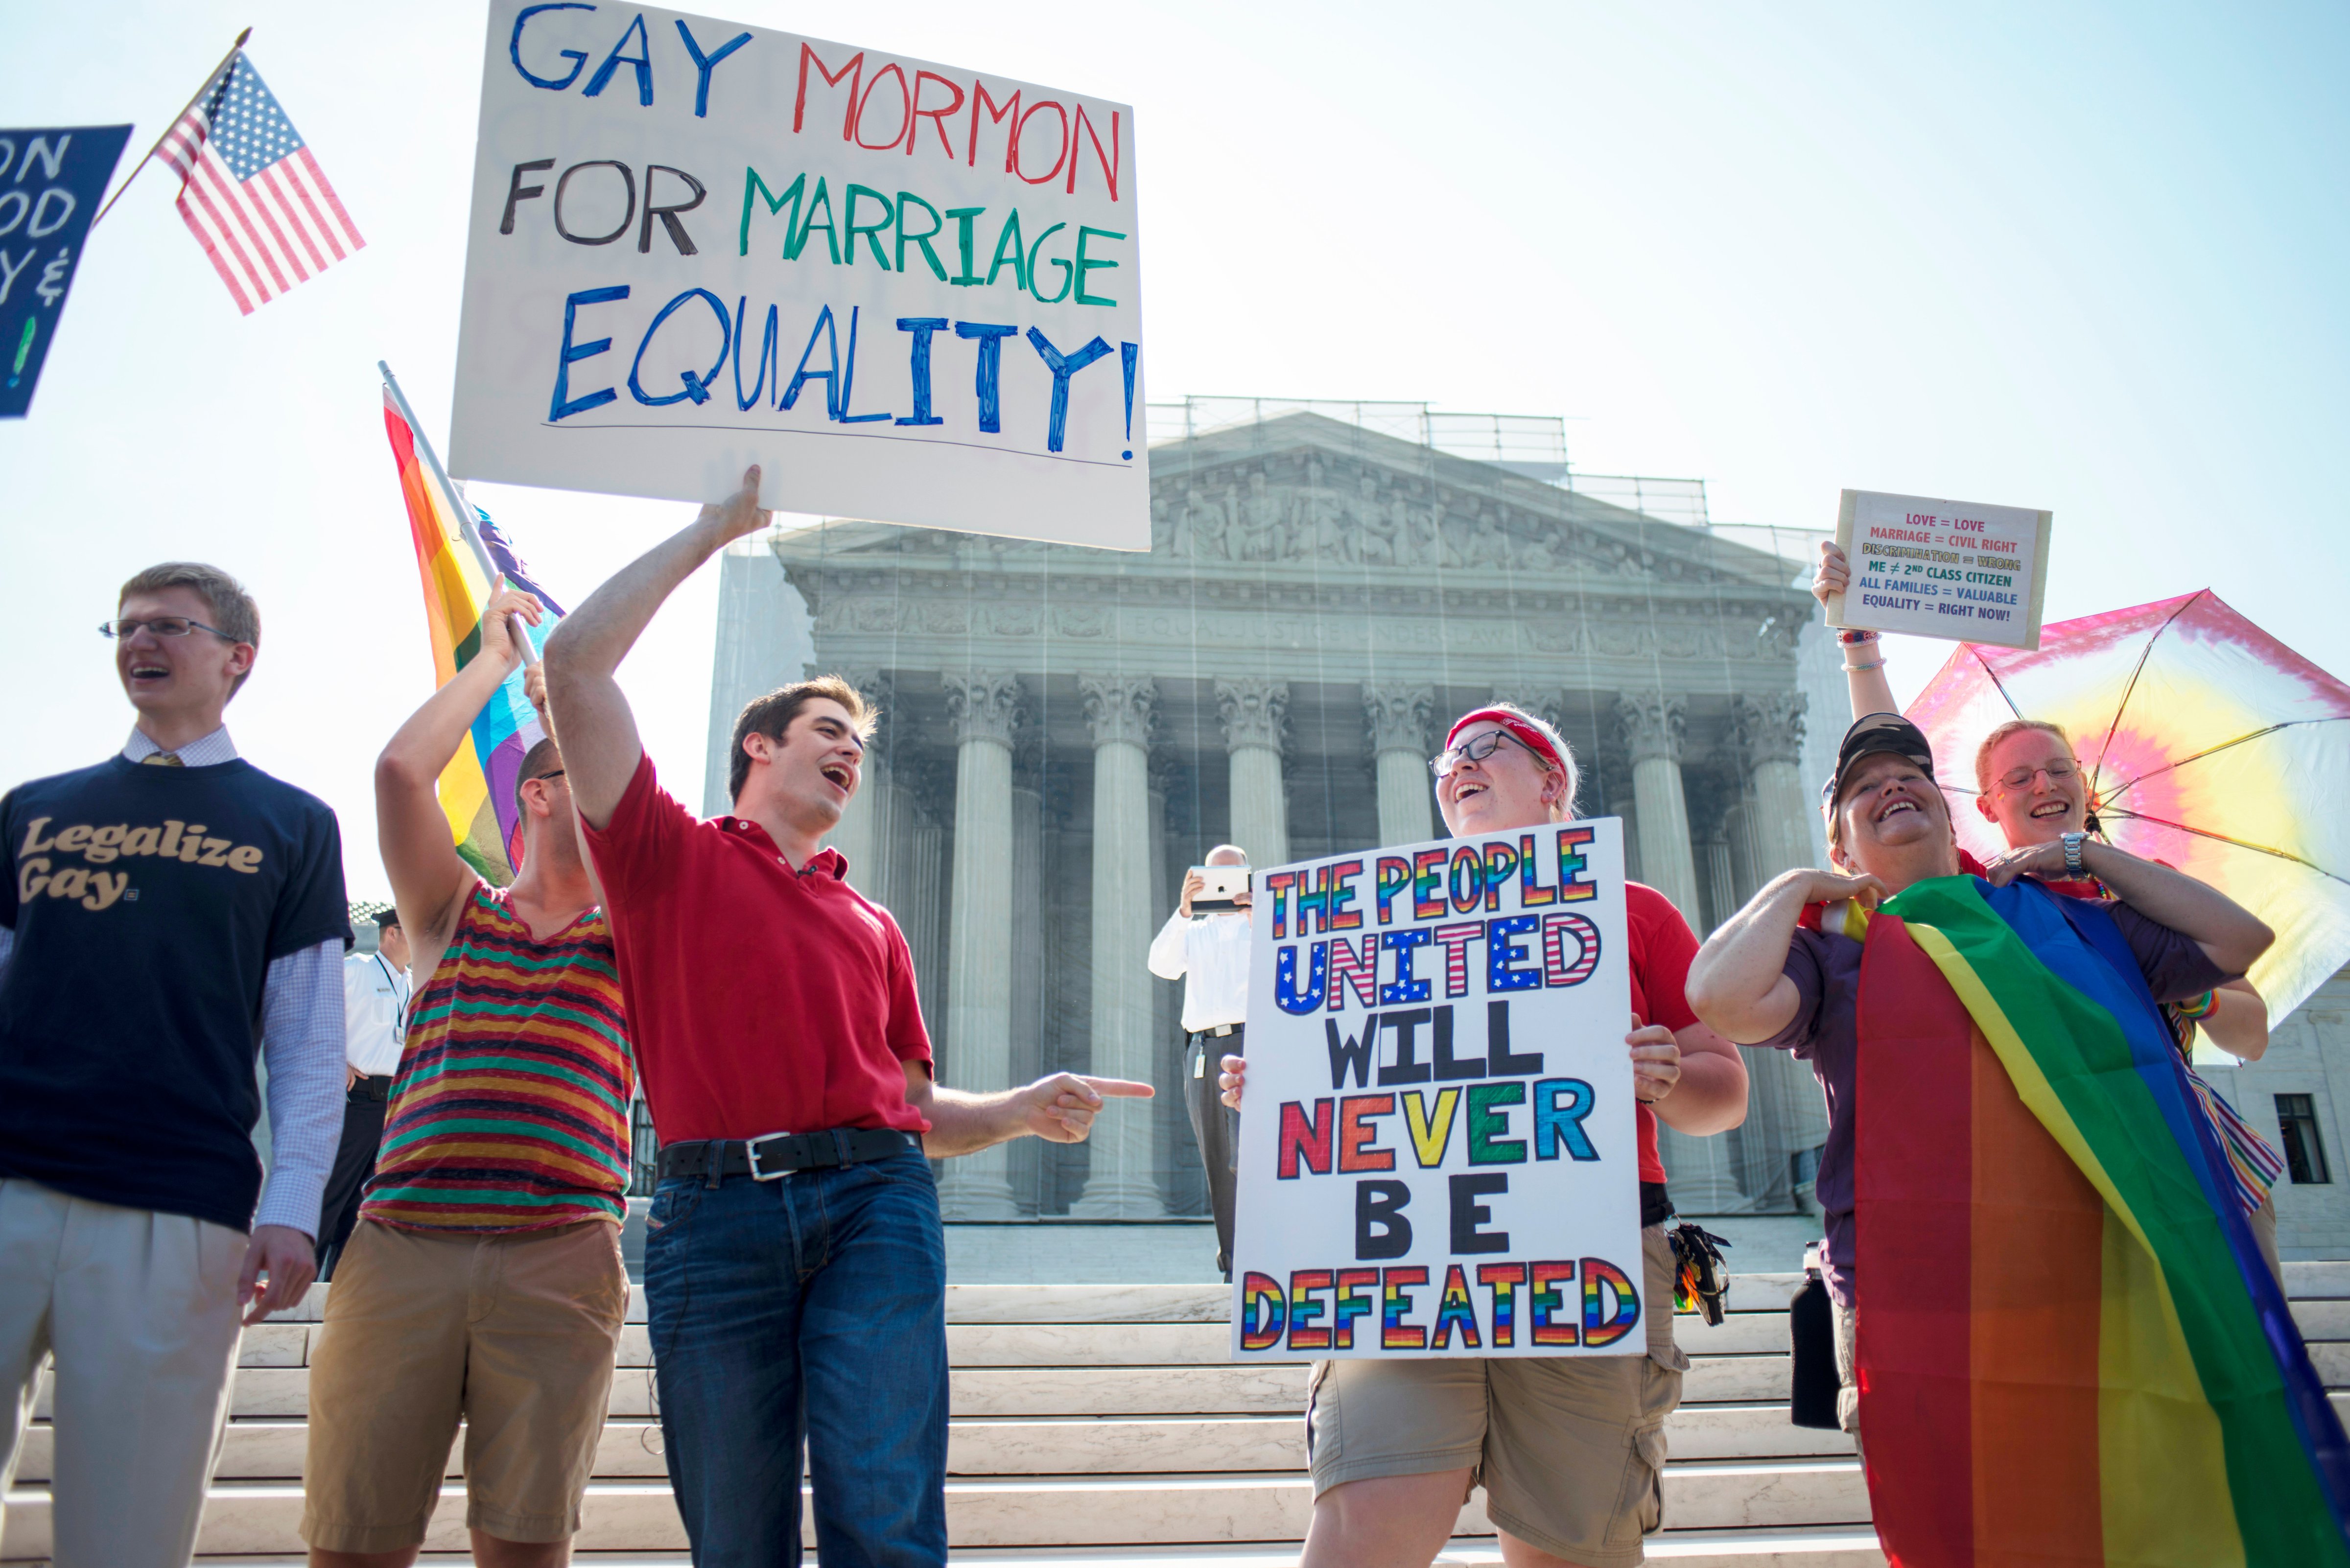 Gay rights supporters cheer and chant outside of the United States Supreme Court waiting for the ruling  on Proposition 8 and the Defense of Marriage Act in Washington, D.C. on June 26, 2013.